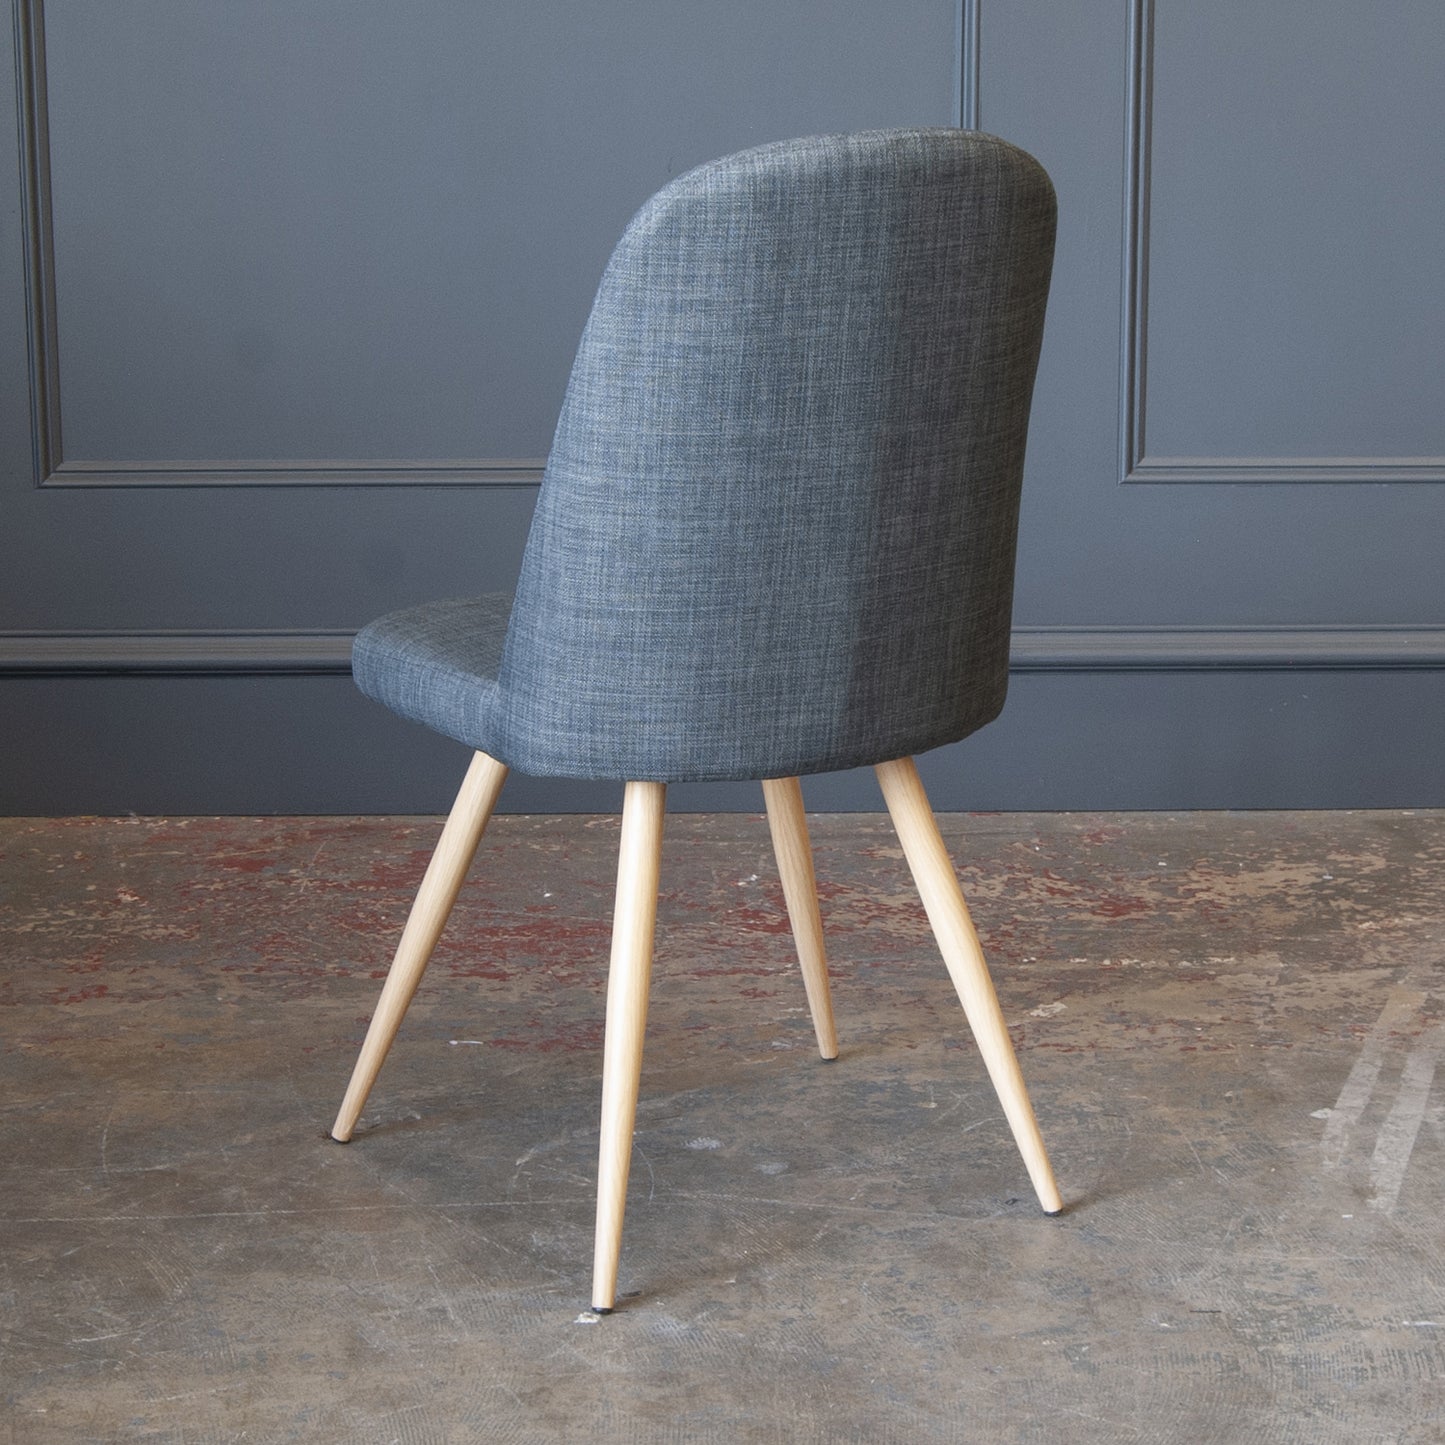 Herne Hill Scoop Dining Chair - Slate